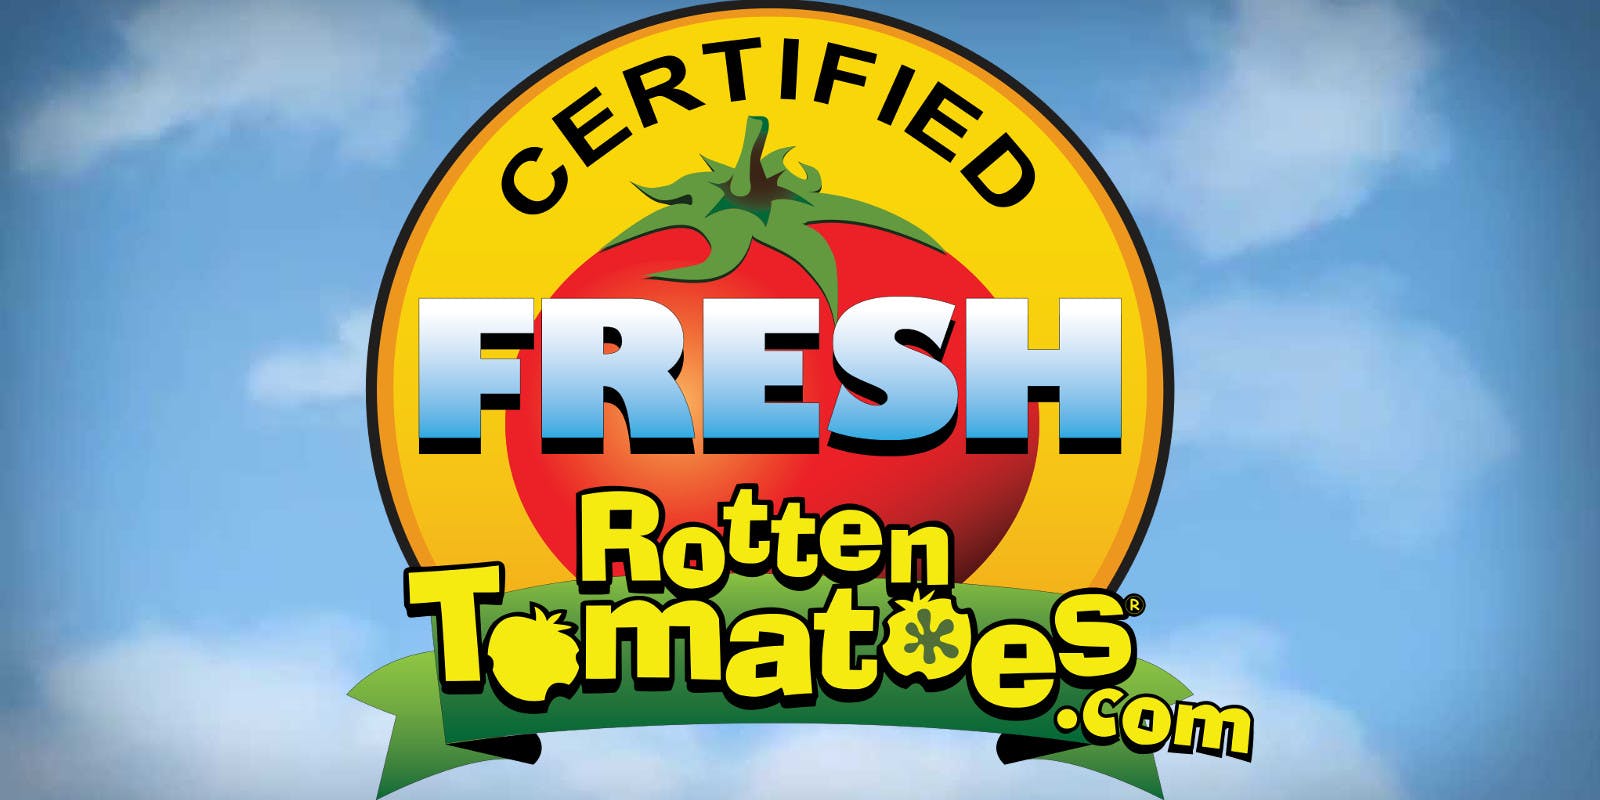 rotten tomatoes, oscar nominations